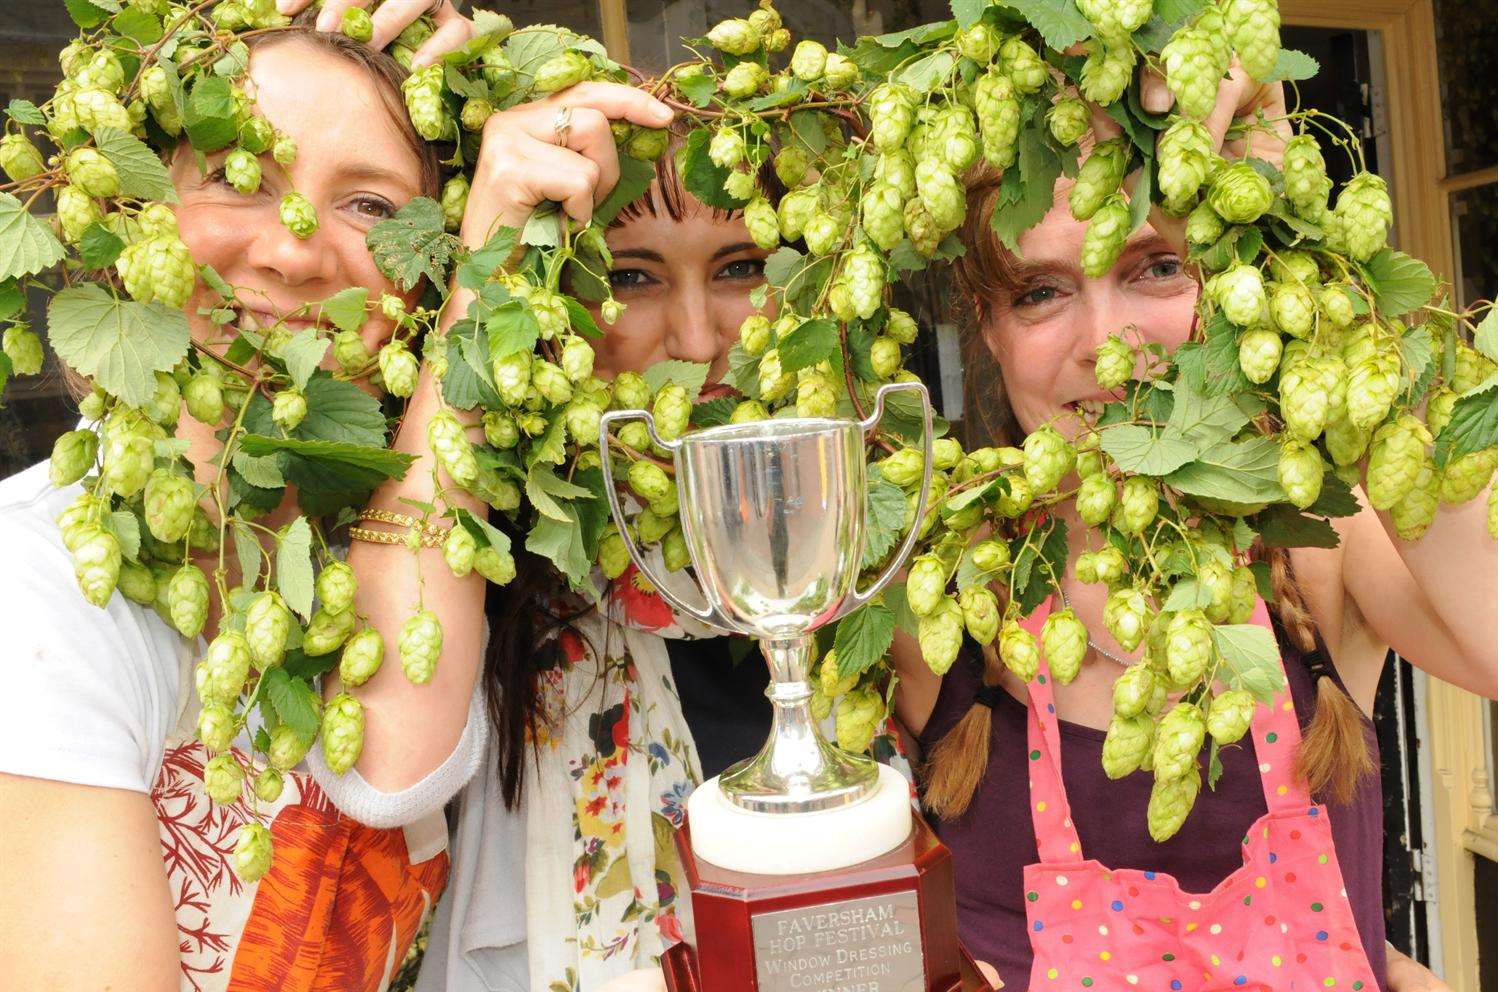 Winners of previous fancy dress competitions at Faversham Hop Festival